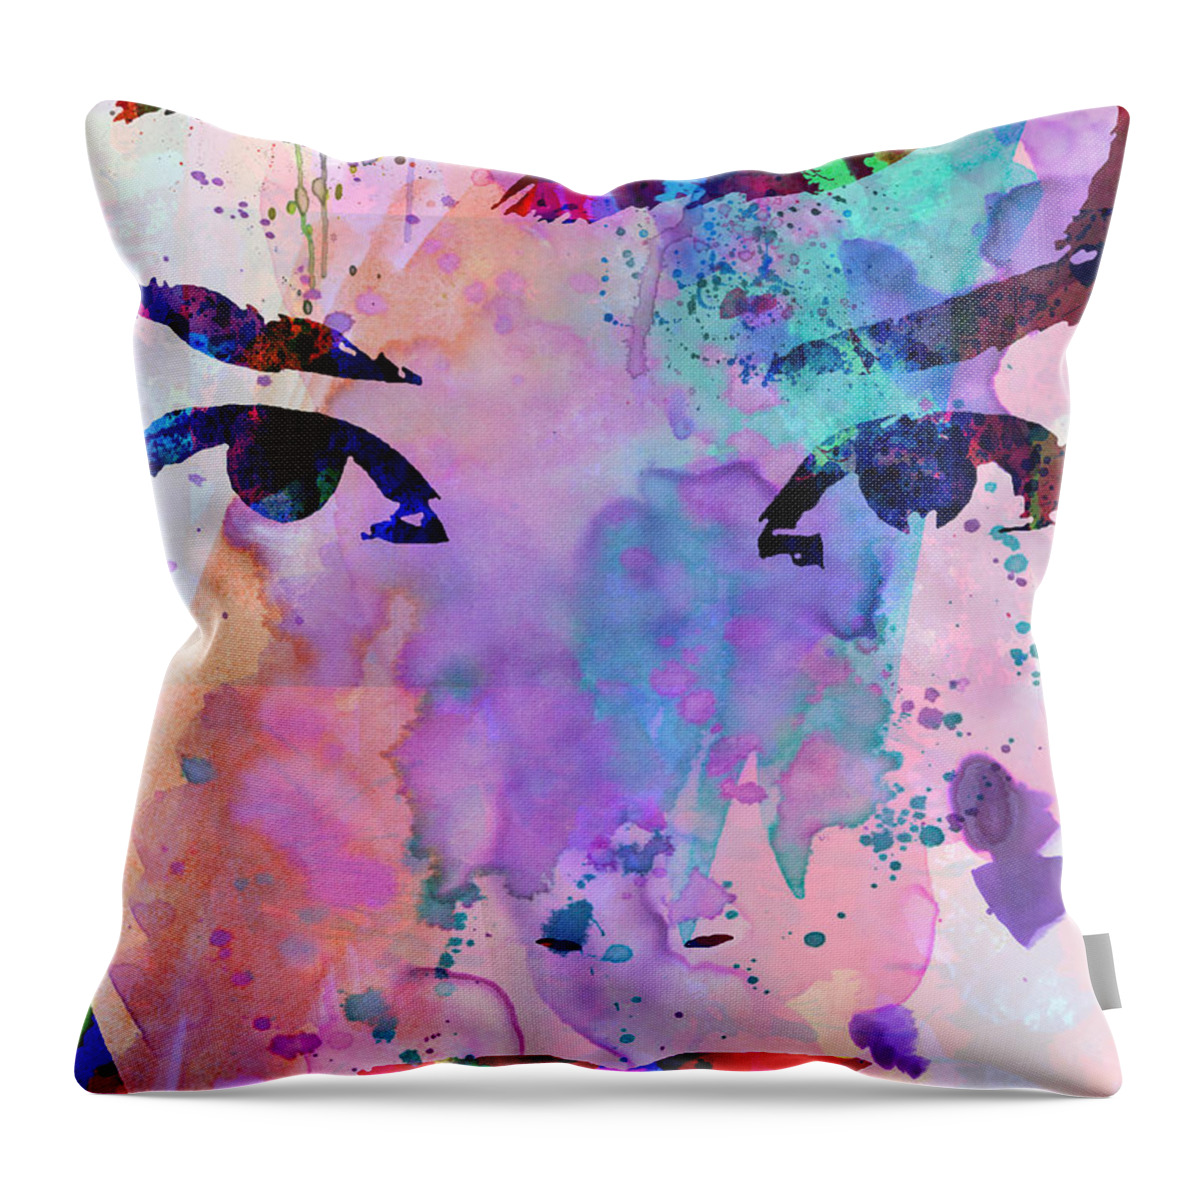 Audrey Hepburn Throw Pillow featuring the painting Audrey Watercolor by Naxart Studio